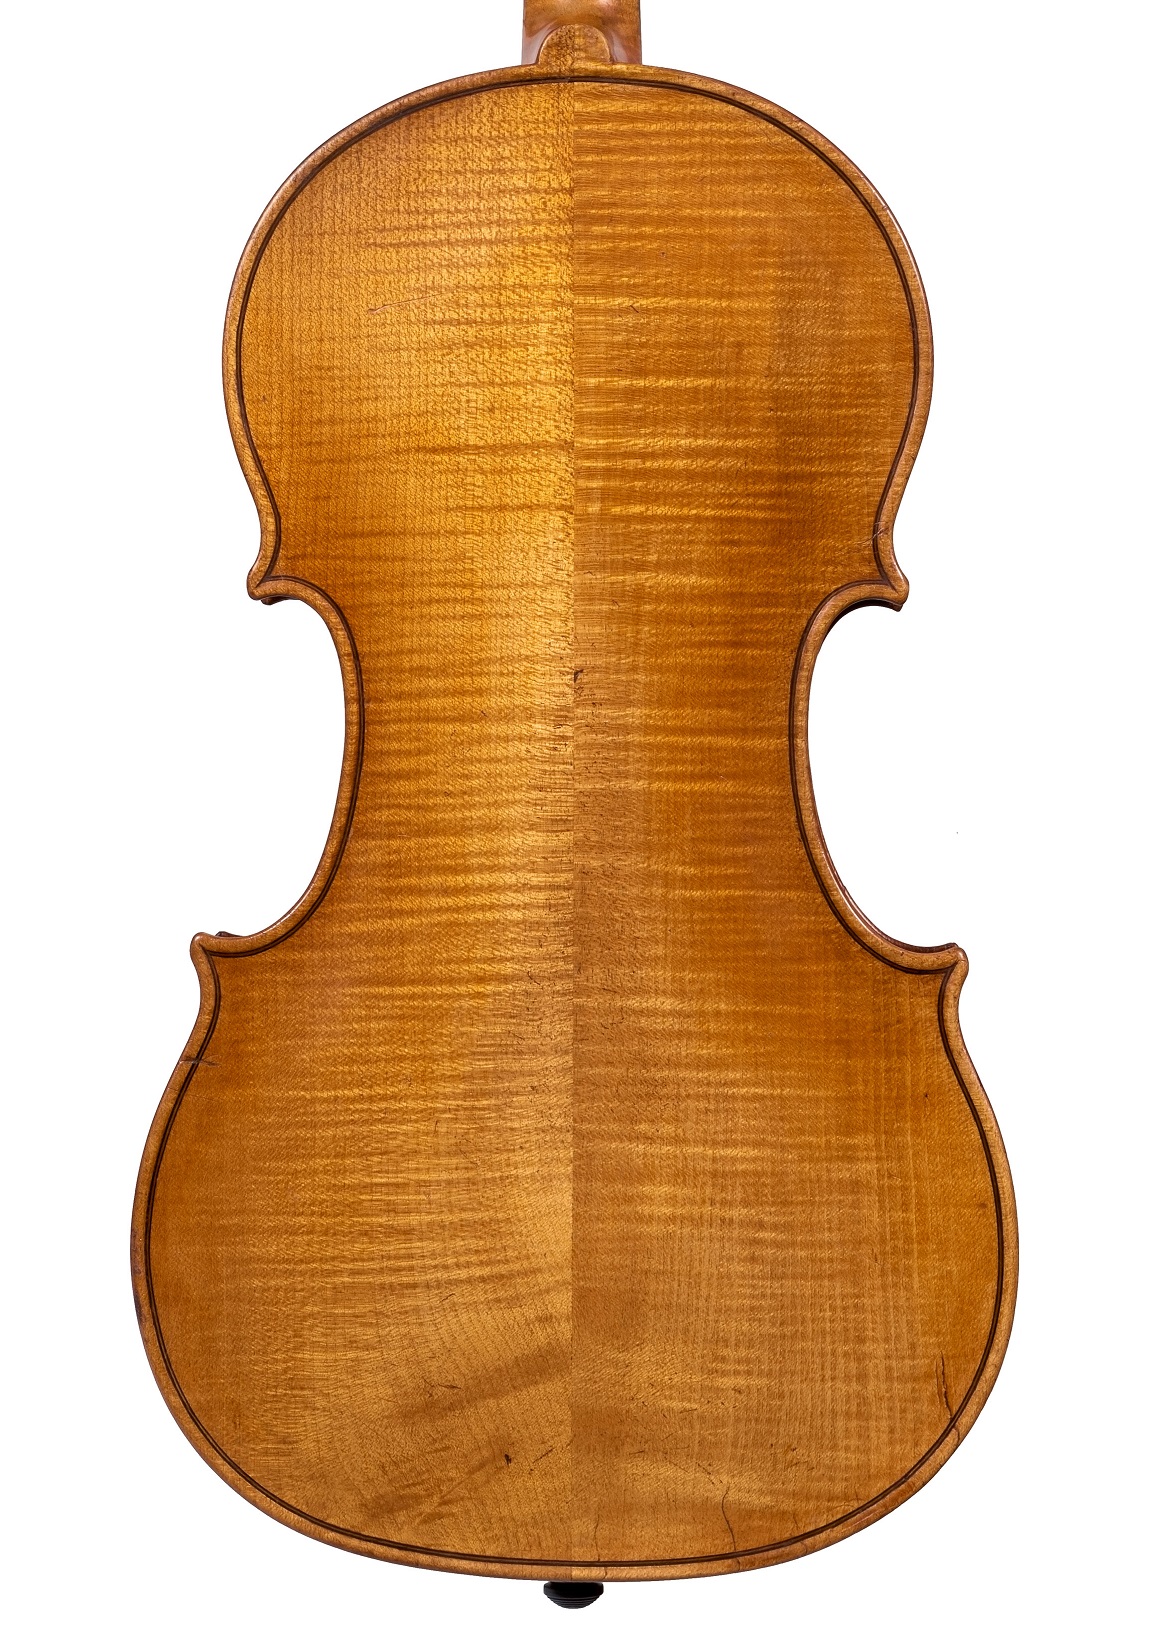 Back of the Gaetano Sgarabotto violin from the Norman Rosenberg collection to be sold at Ingles & Hayday